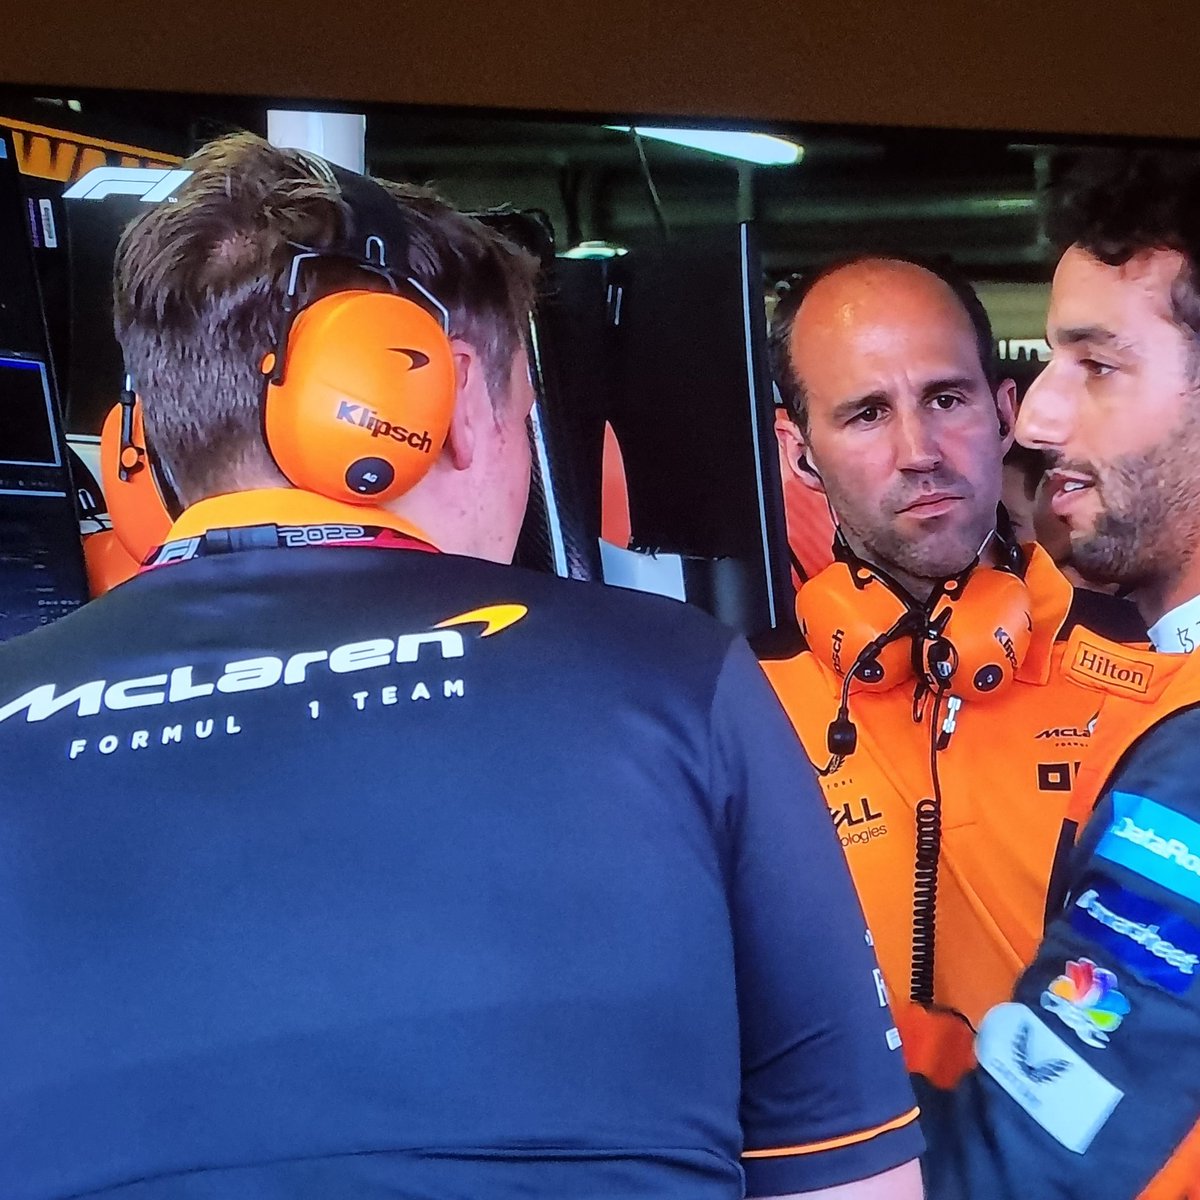 Looks like it’s not just the merch that has issues… 😳😂#F1 #McLaren #MonacoGP #DR3 